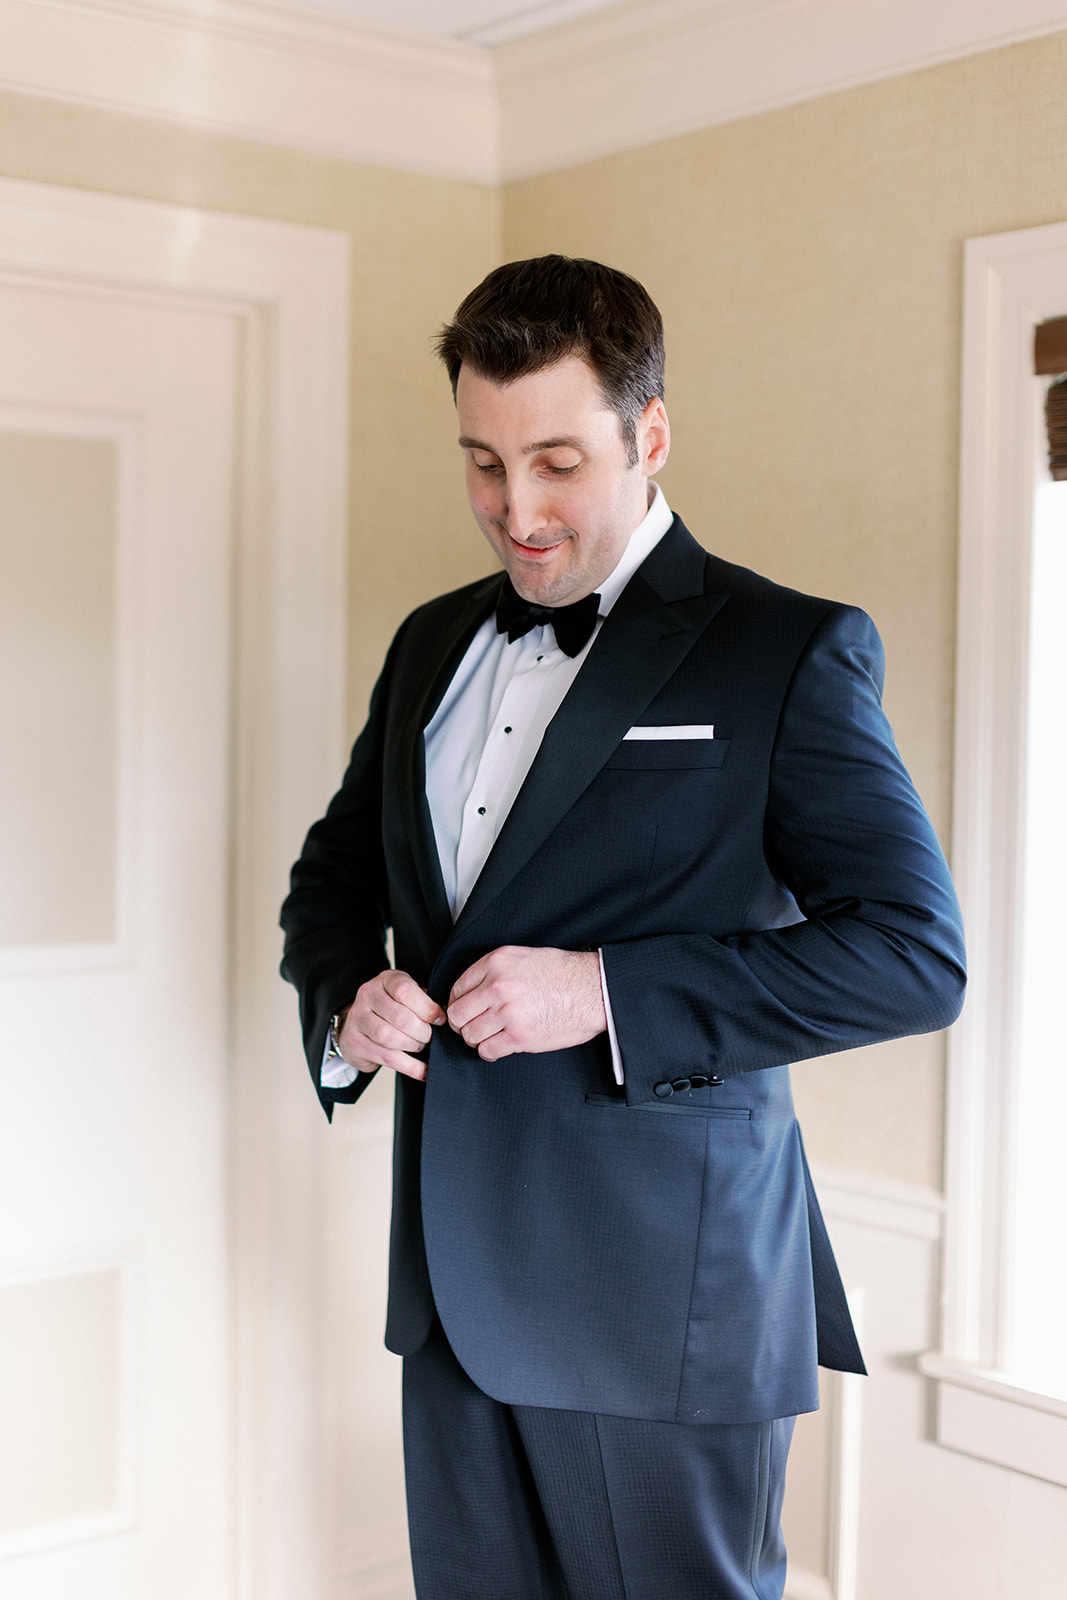 Groom getting ready putting on his suit jacket. 